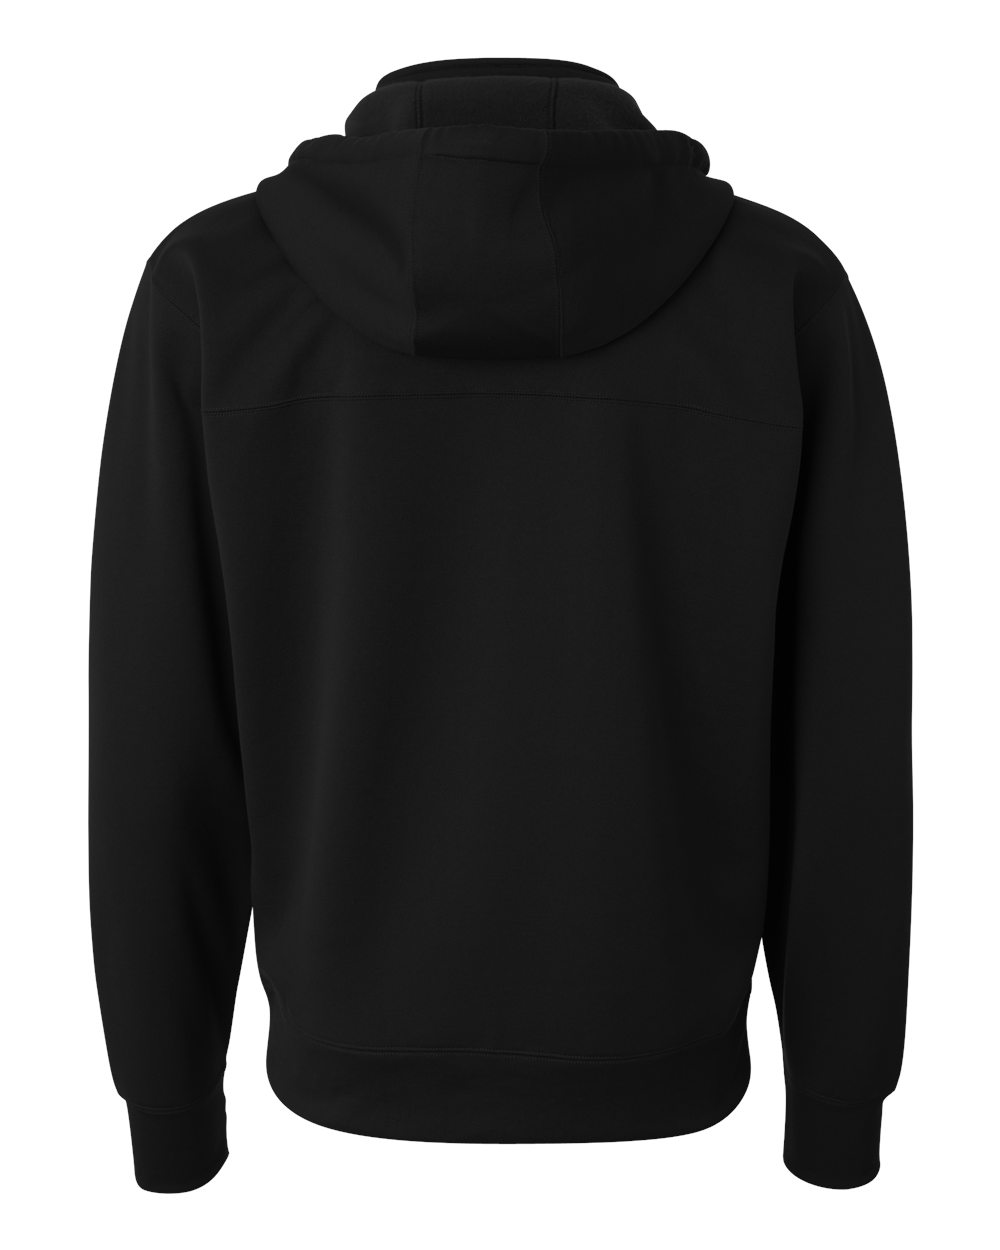 Independent Trading Exp80 Ptz Poly Tech Full Zip Hooded Sweatshirt ...